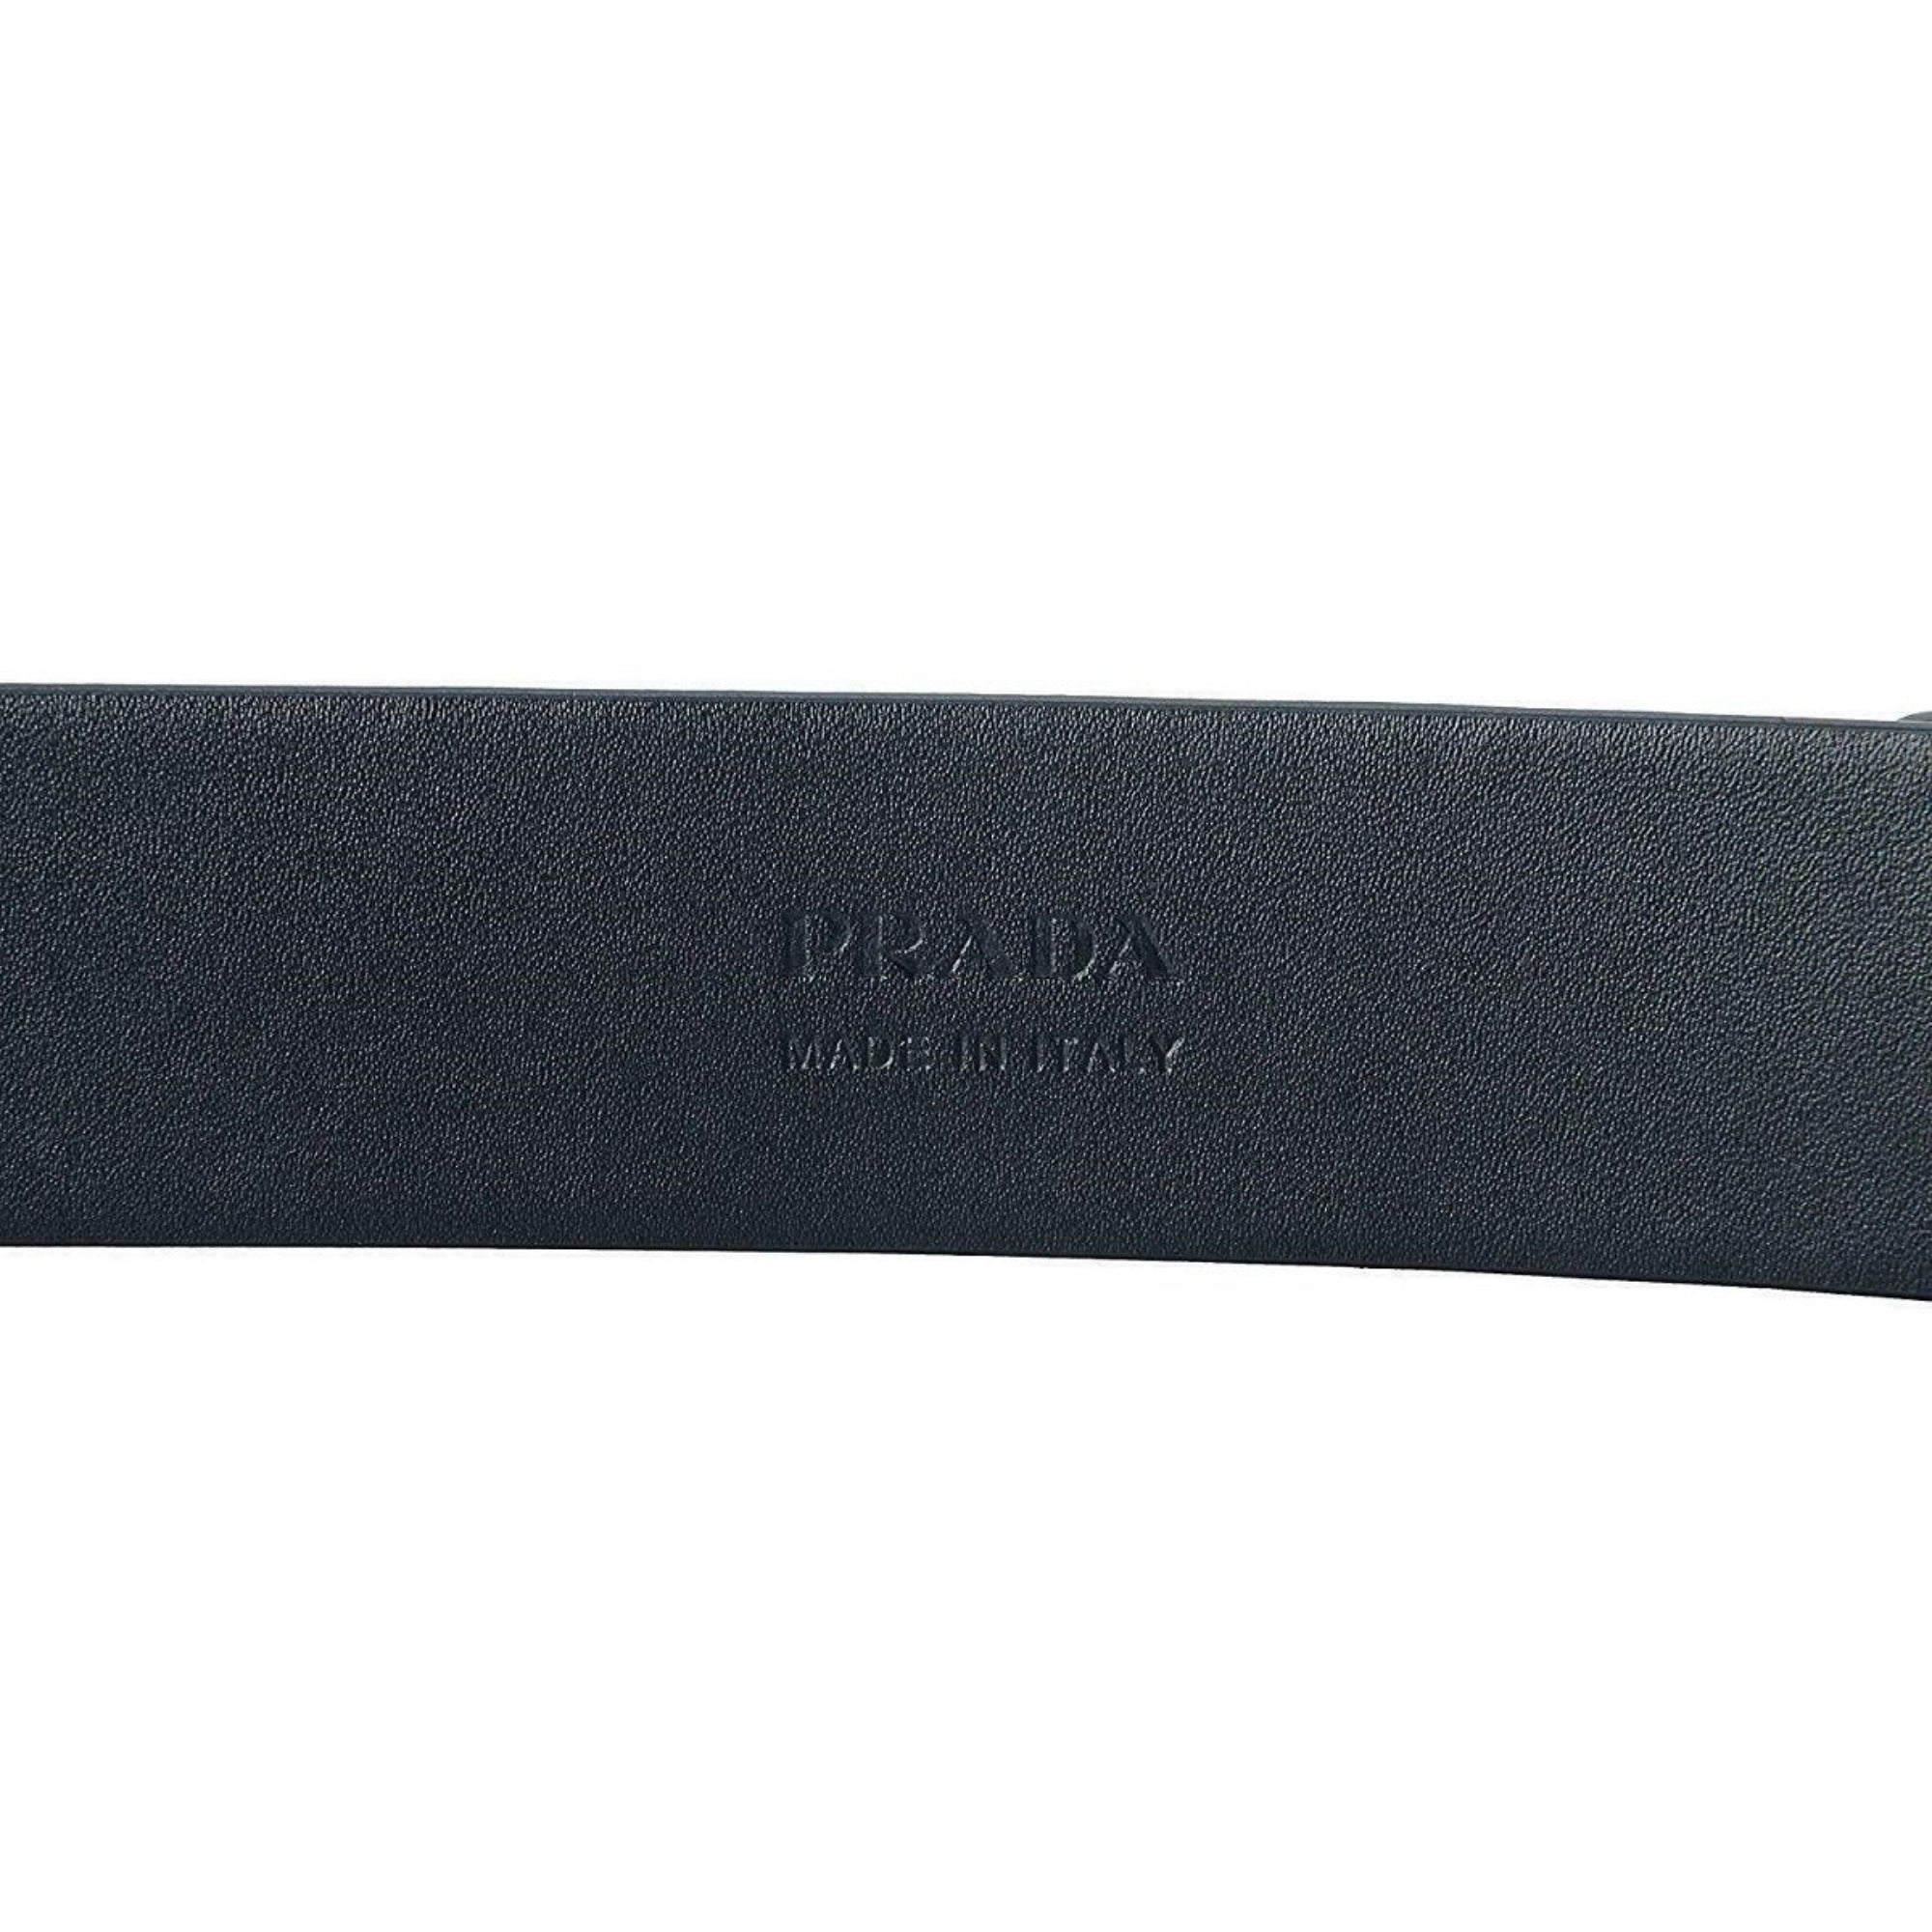 Prada Navy Blue Saffiano Leather Belt with Silver Belt Buckle 2CM046 Size 90 / 36 at_Queen_Bee_of_Beverly_Hills